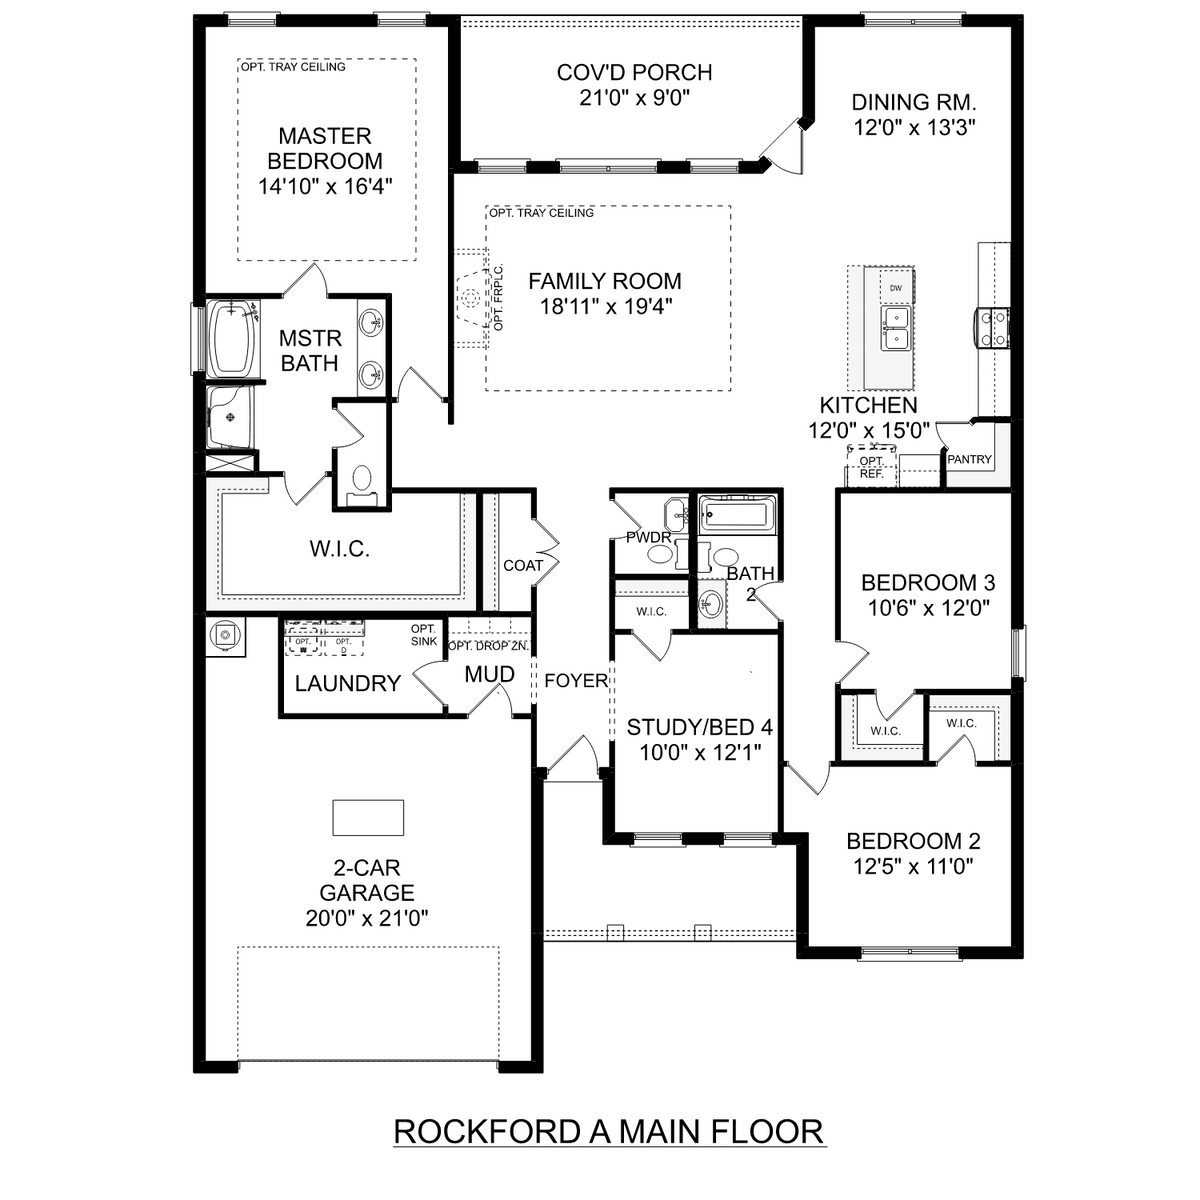 1 - The Rockford floor plan layout for 612 Ronnie Drive in Davidson Homes' Cain Park community.